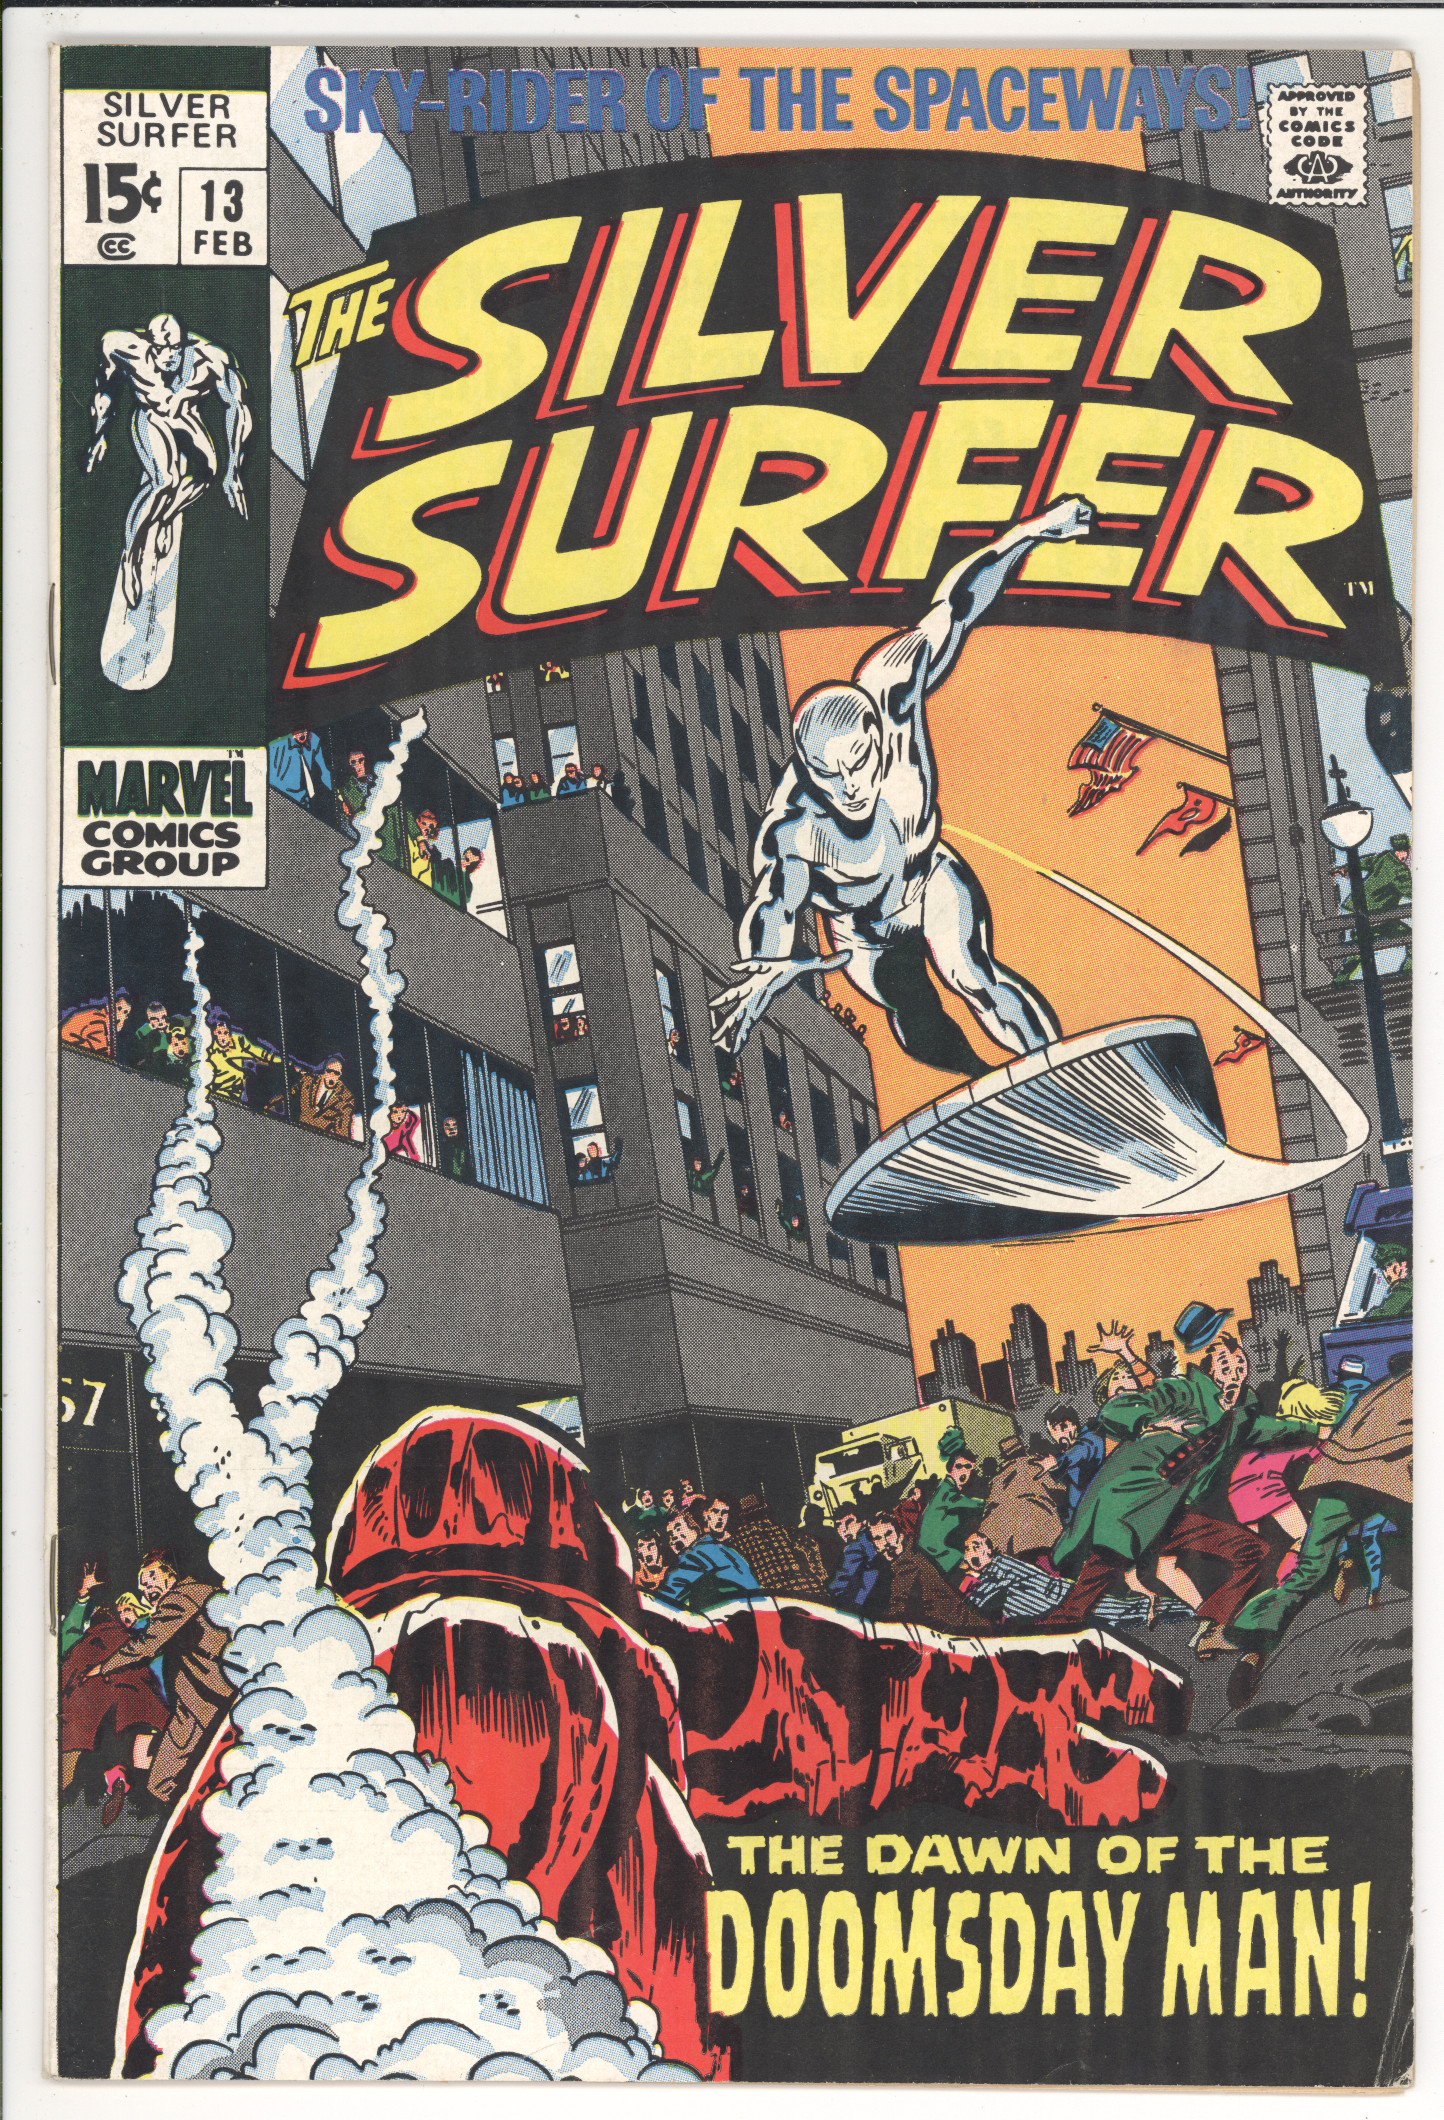 Silver Surfer #13 front